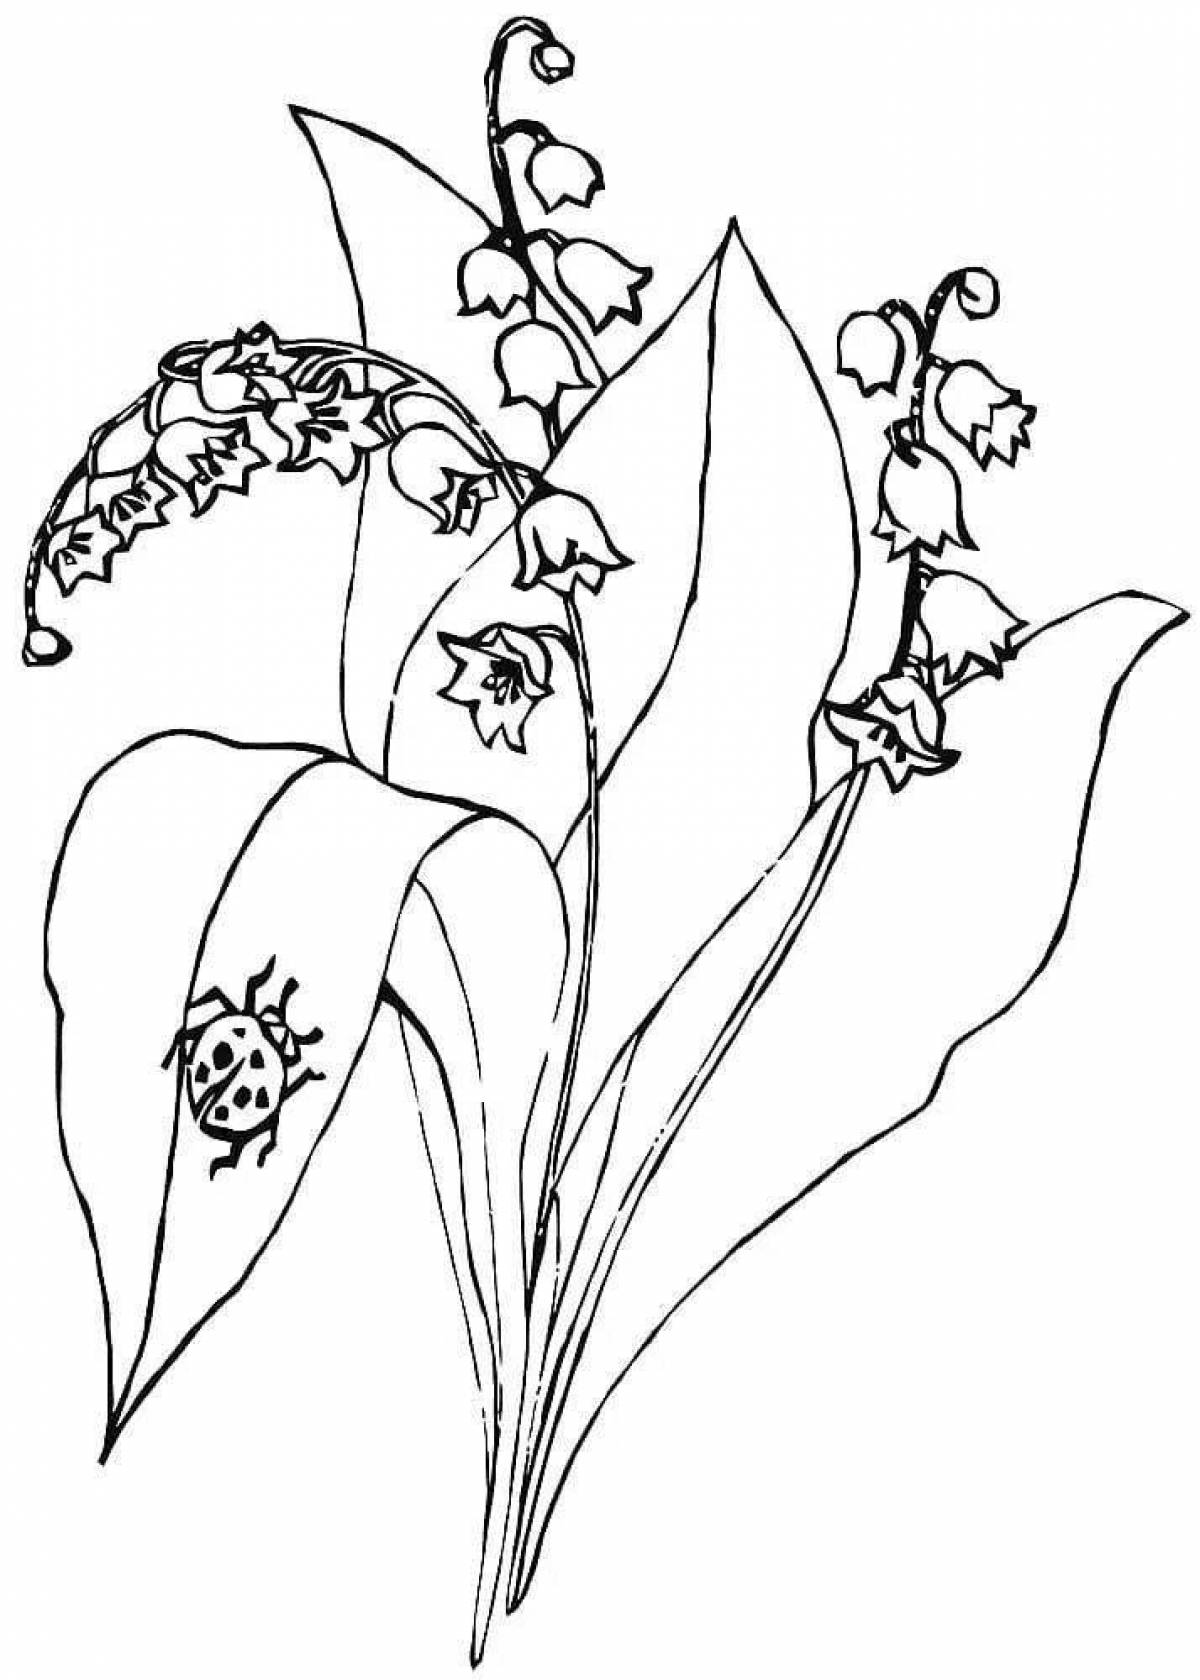 Delightful lily of the valley coloring book for kids